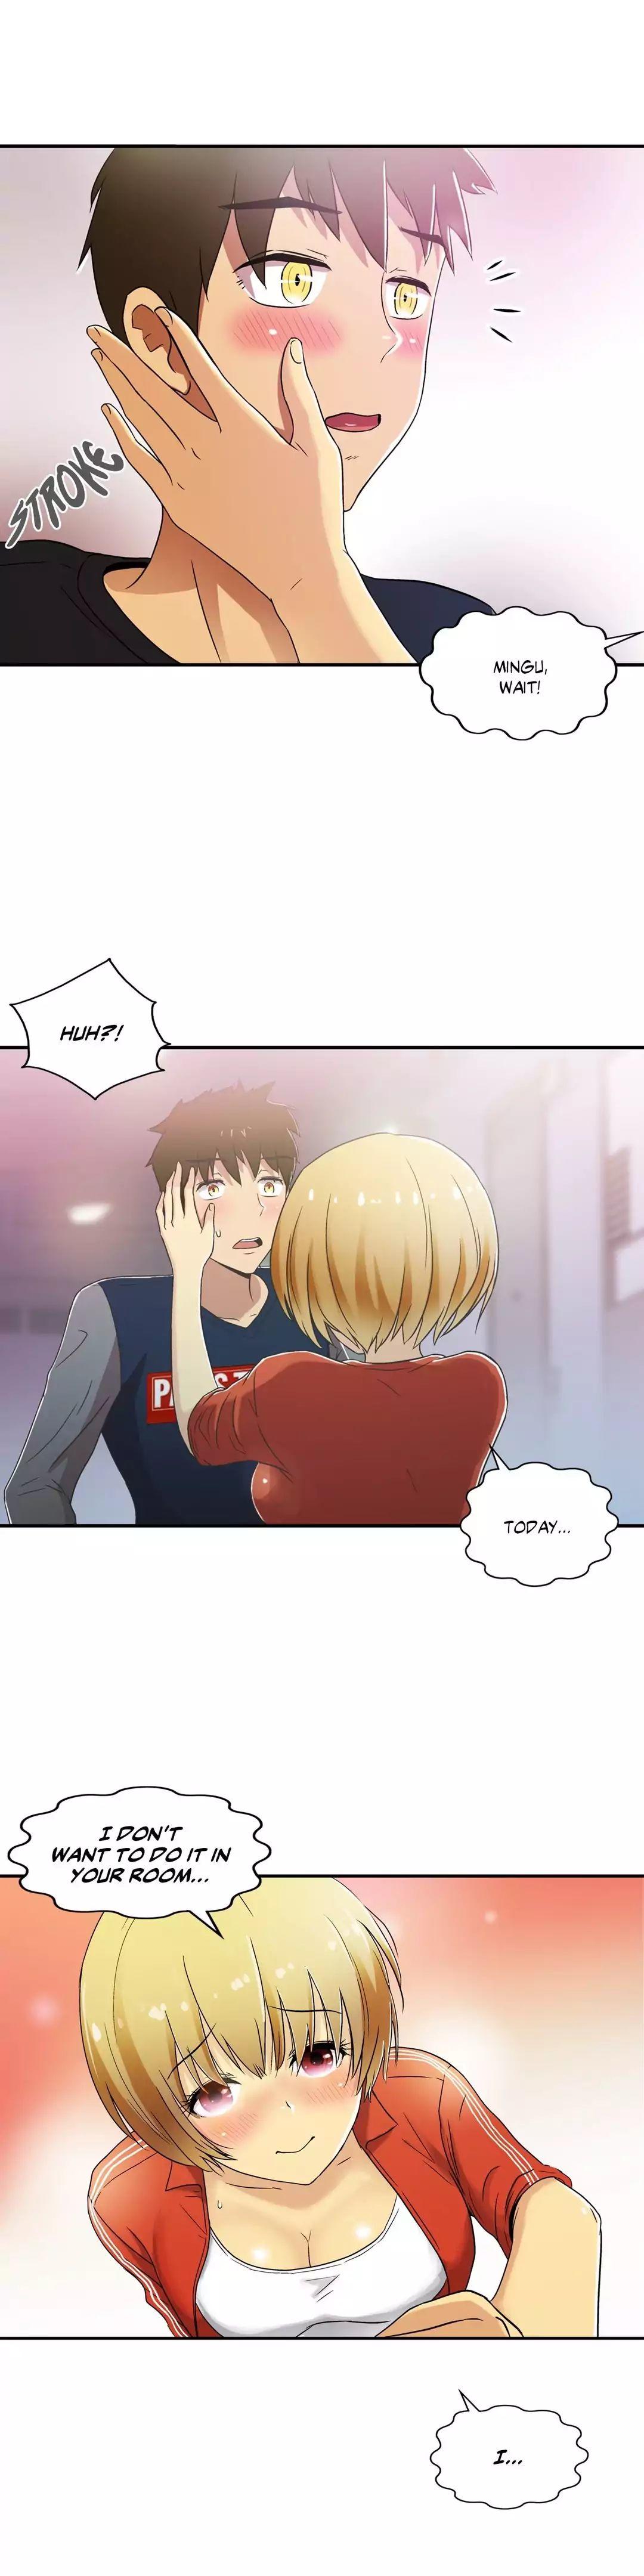 Read One-Room Hero Chapter 40: Just Curious on Mangakakalot